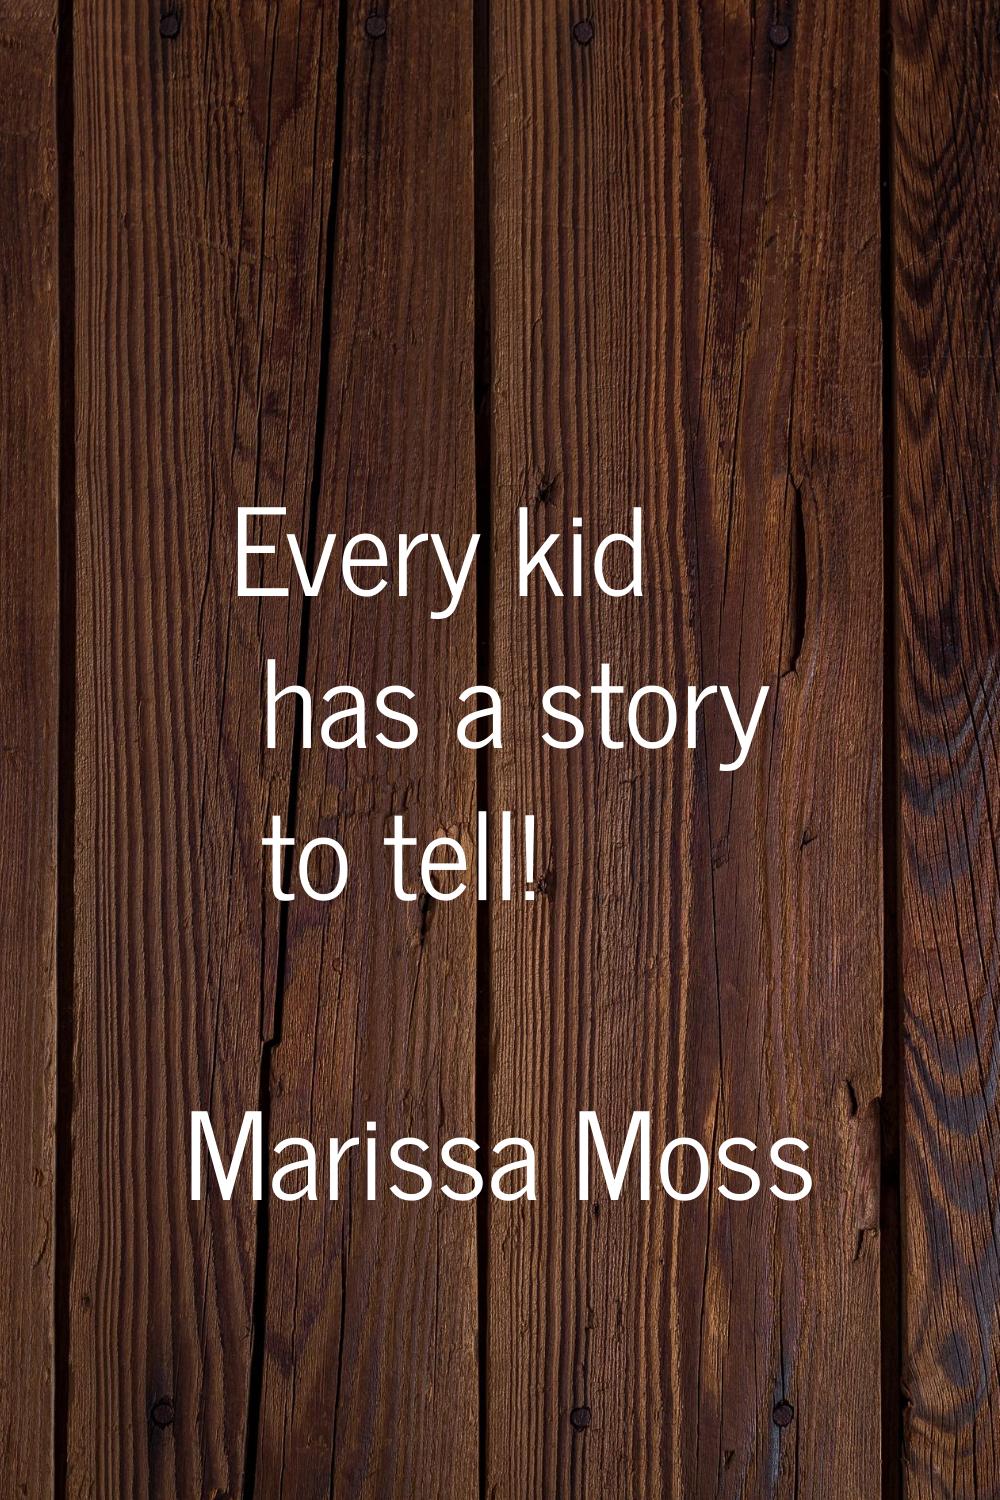 Every kid has a story to tell!